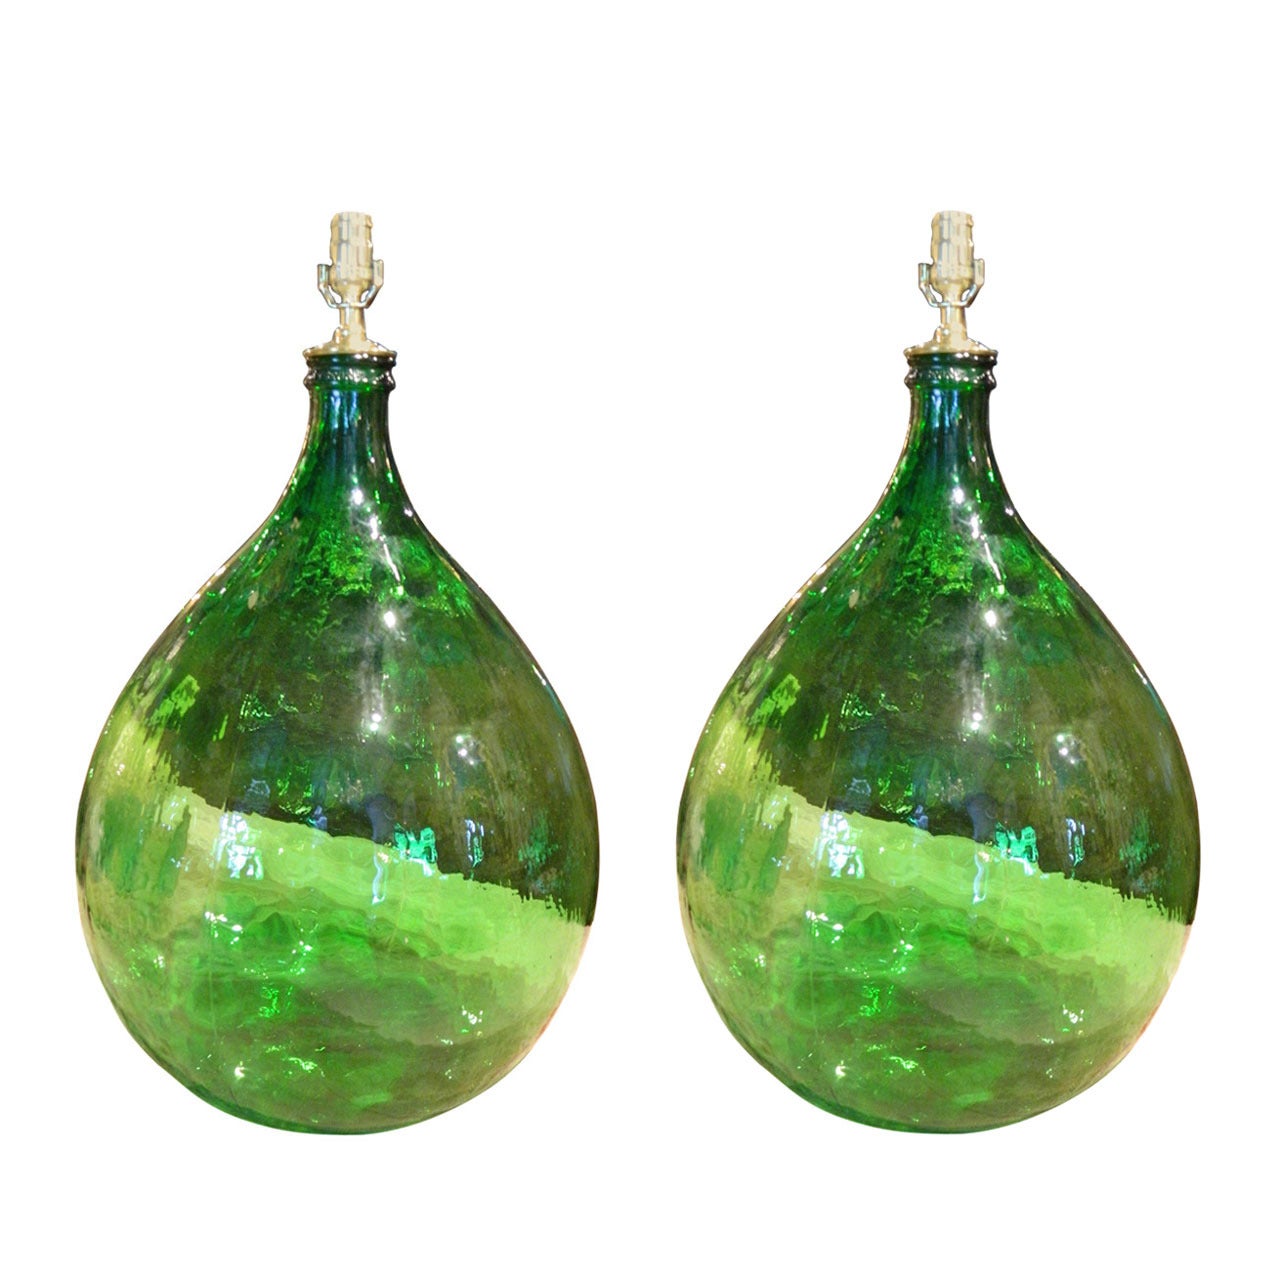 Early 20th Century Pair of Italian Green Glass Wine Bottles Adapted as Lamps